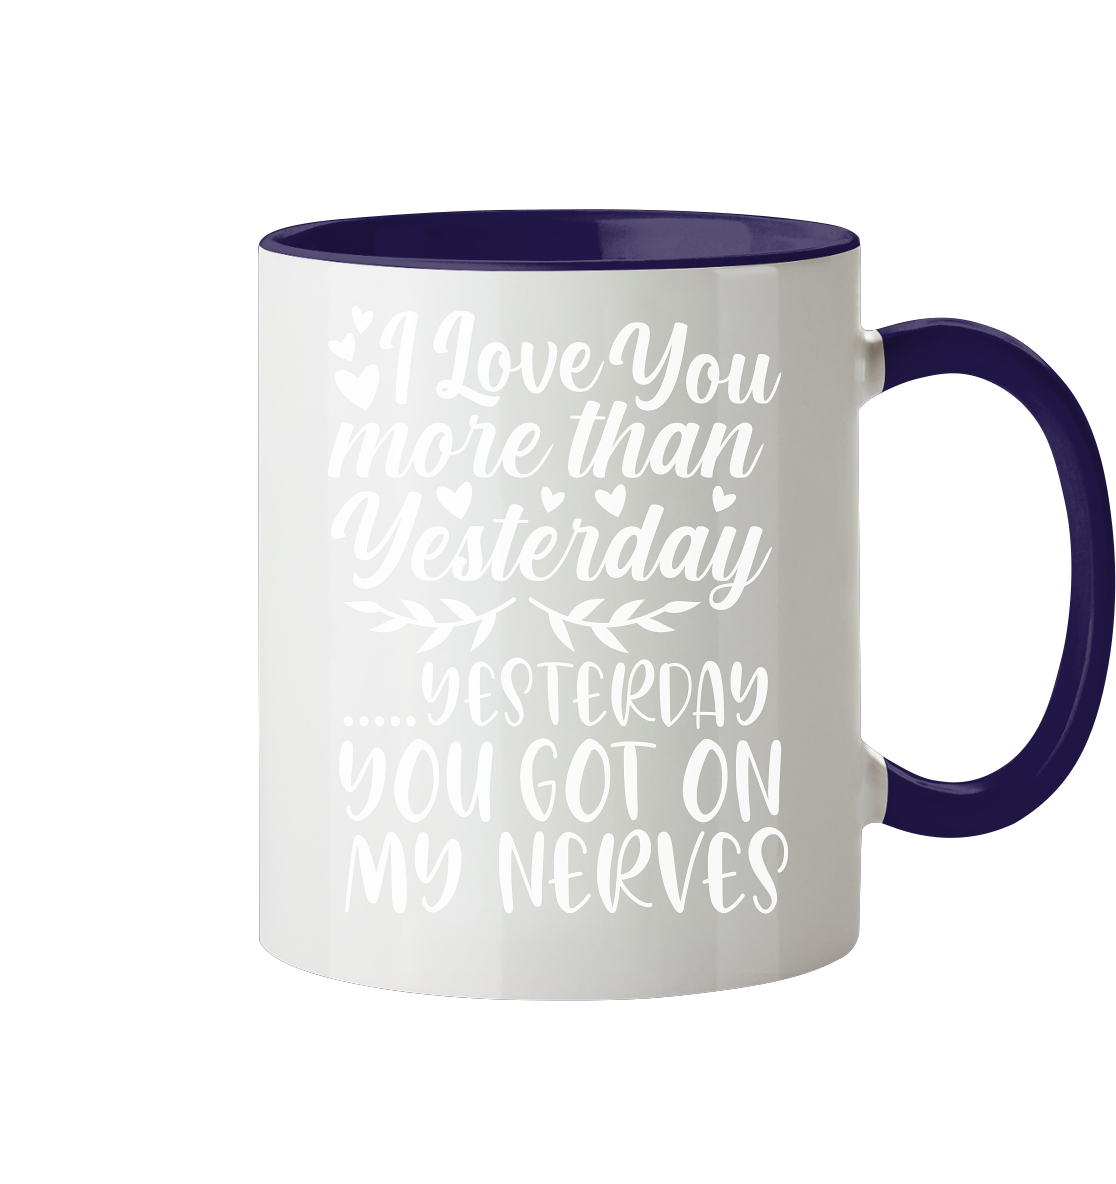 I love you more than yesterday  - Tasse zweifarbig